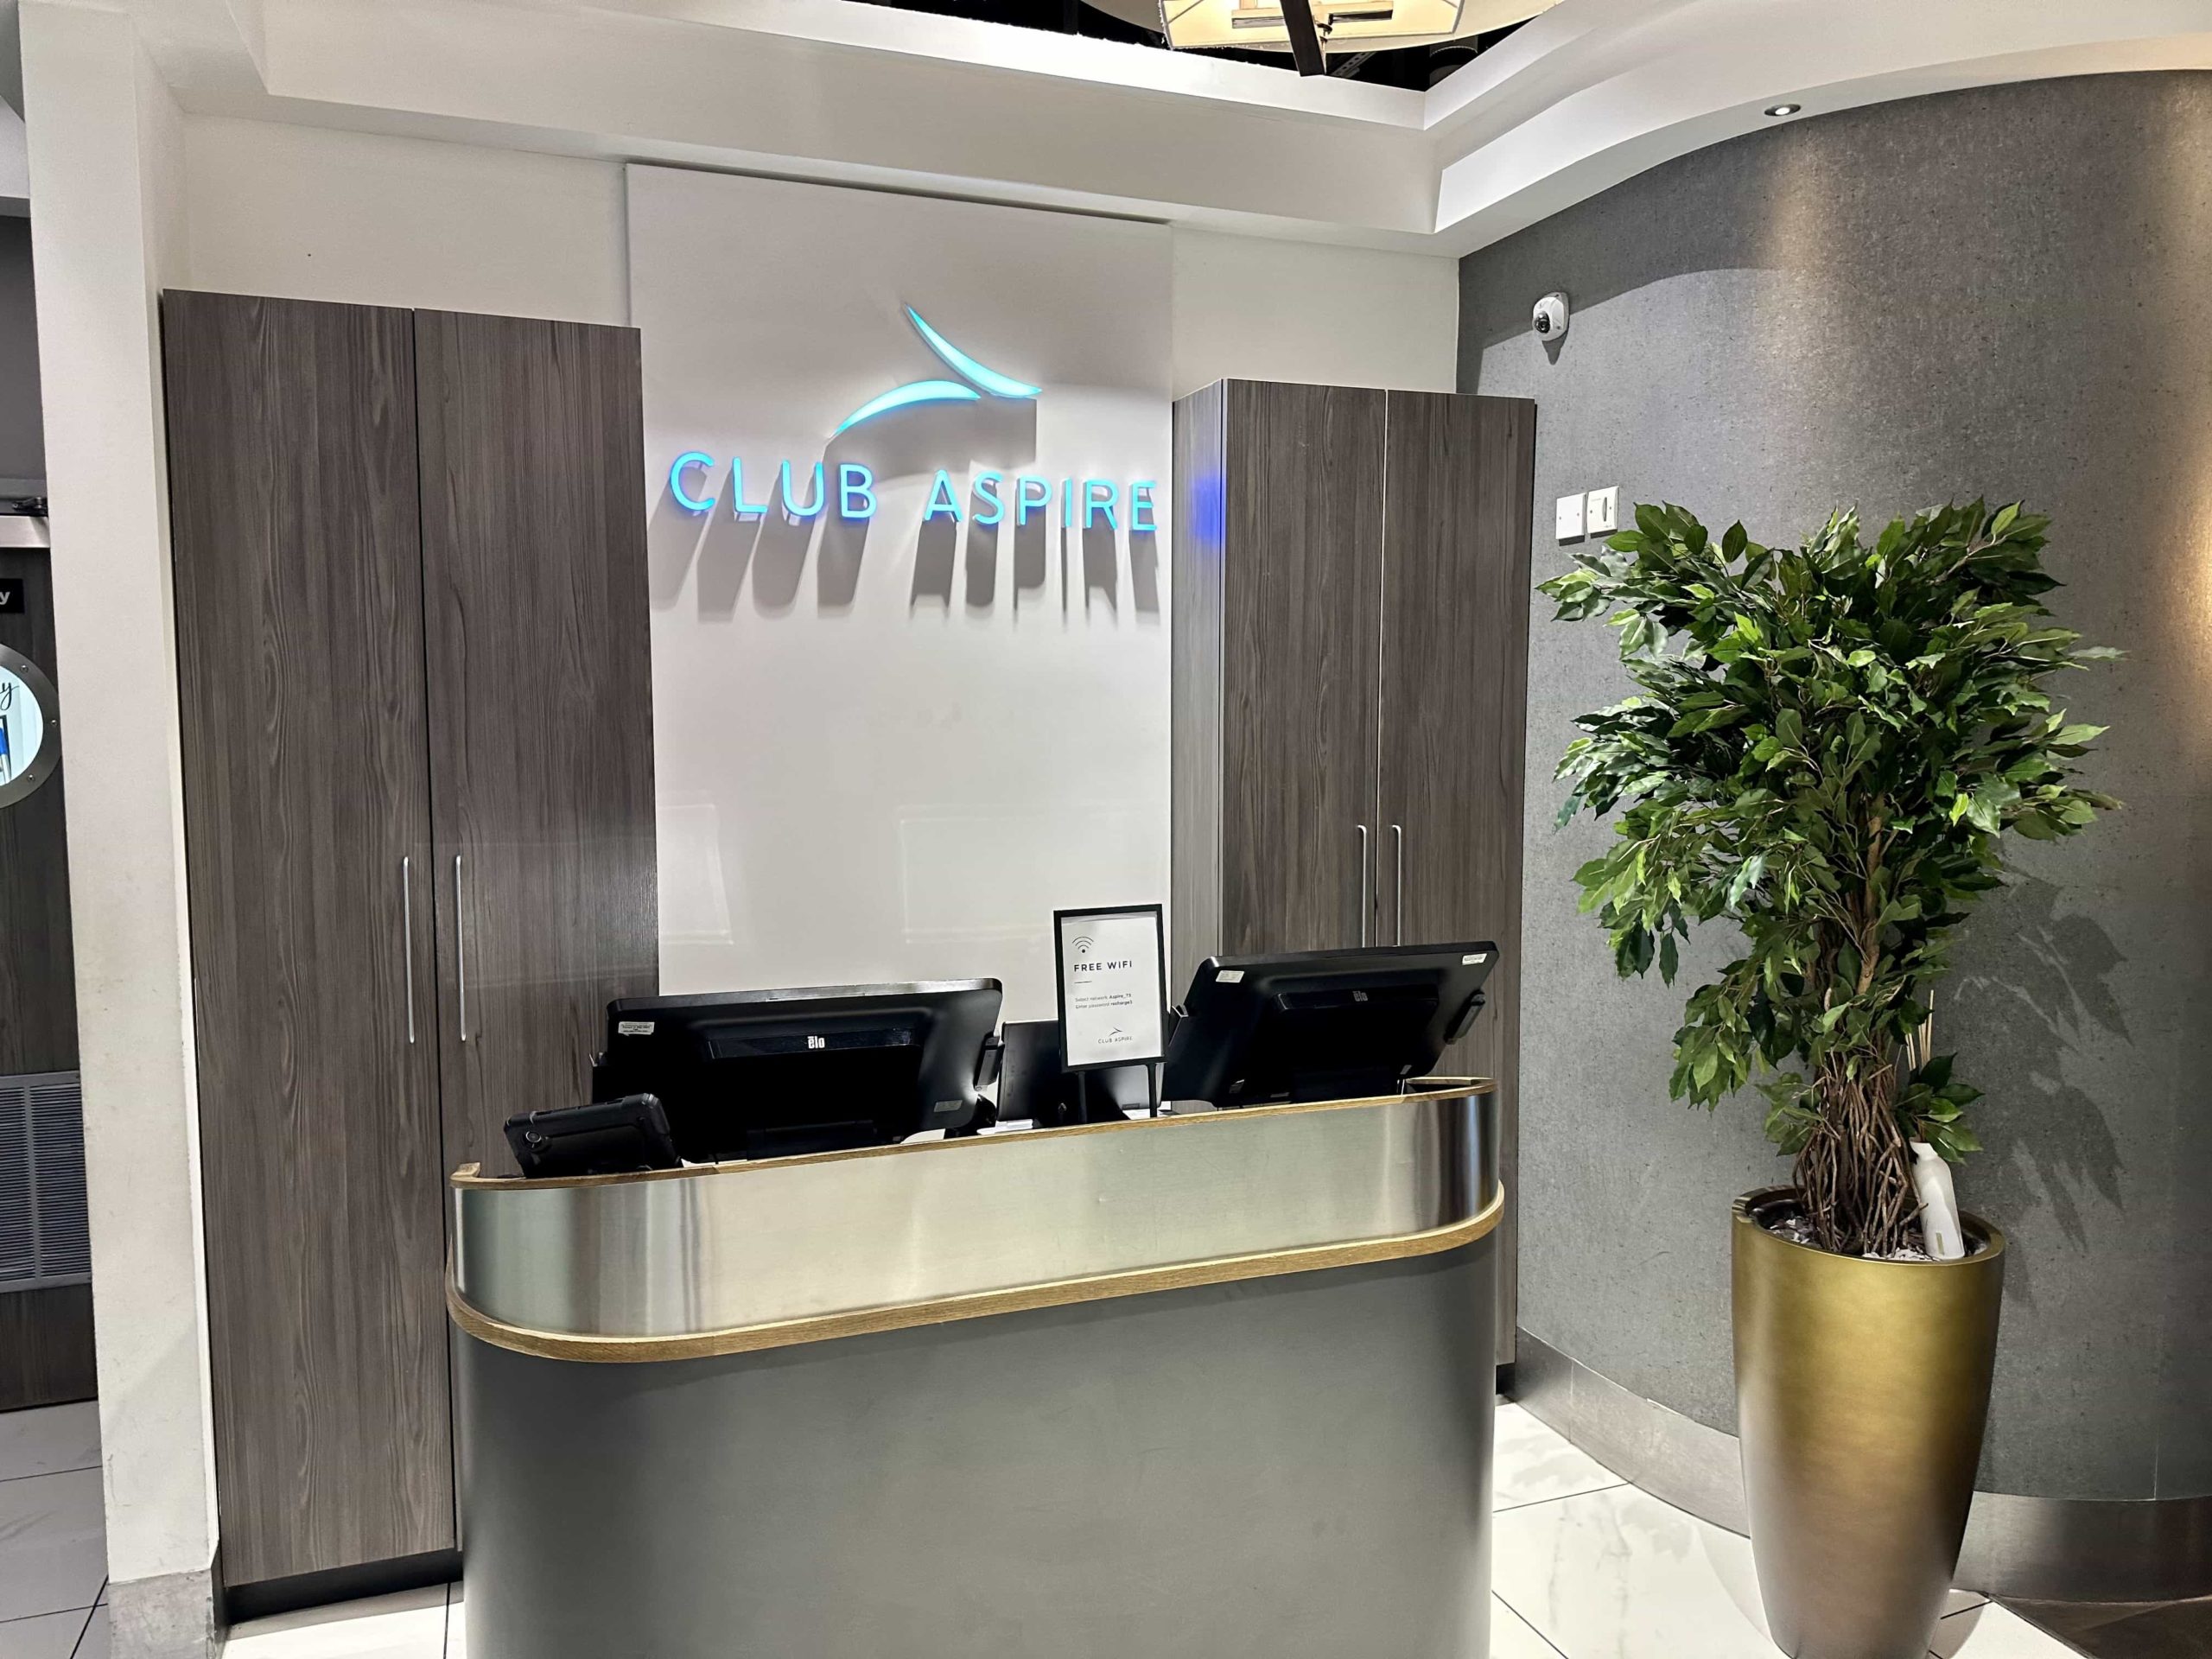 A reception desk with "Club Aspire" signage on the wall behind